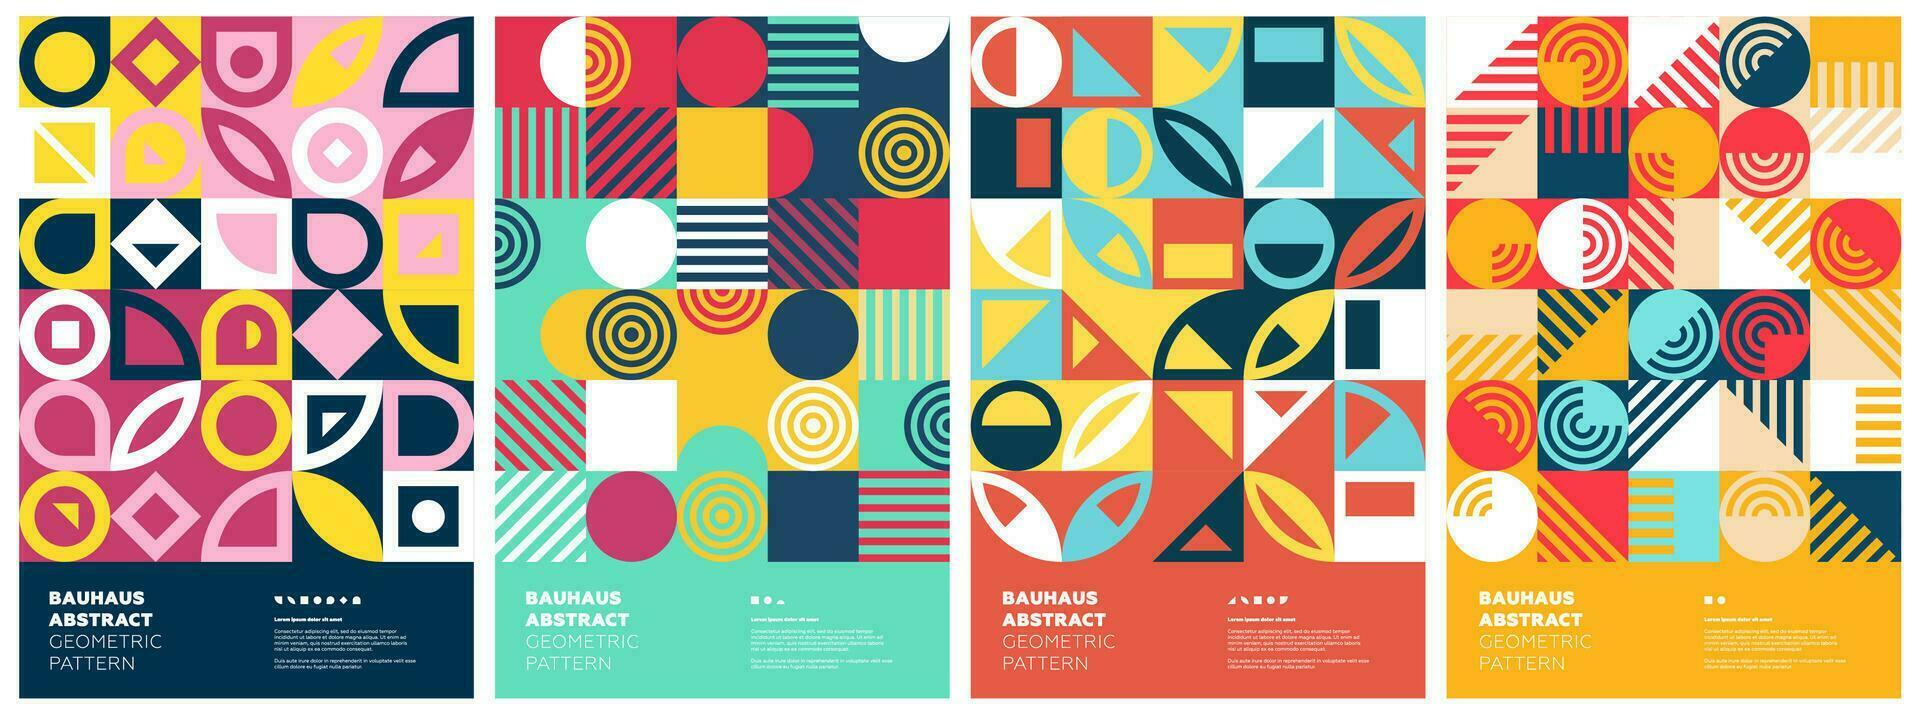 Abstract geometric bauhaus artworks. Simple shapes collage poster set. Memphis pattern background collection. Retro modern trendy graphic paintings. Vintage postmodern art print vector eps designs